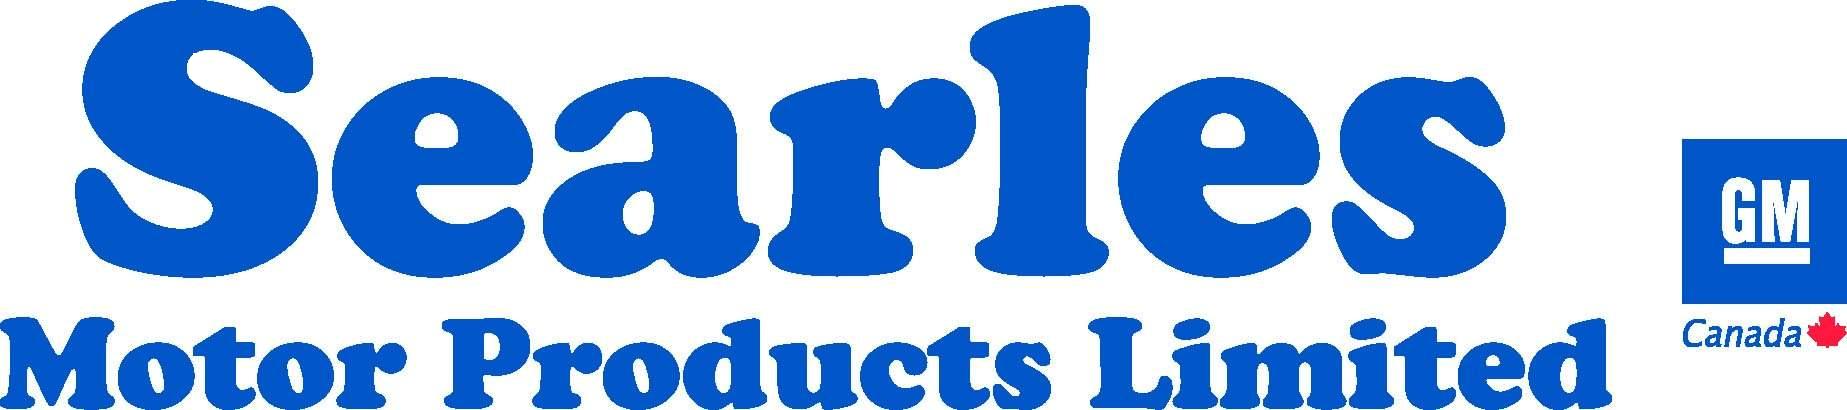 Searles Motor Products Limited